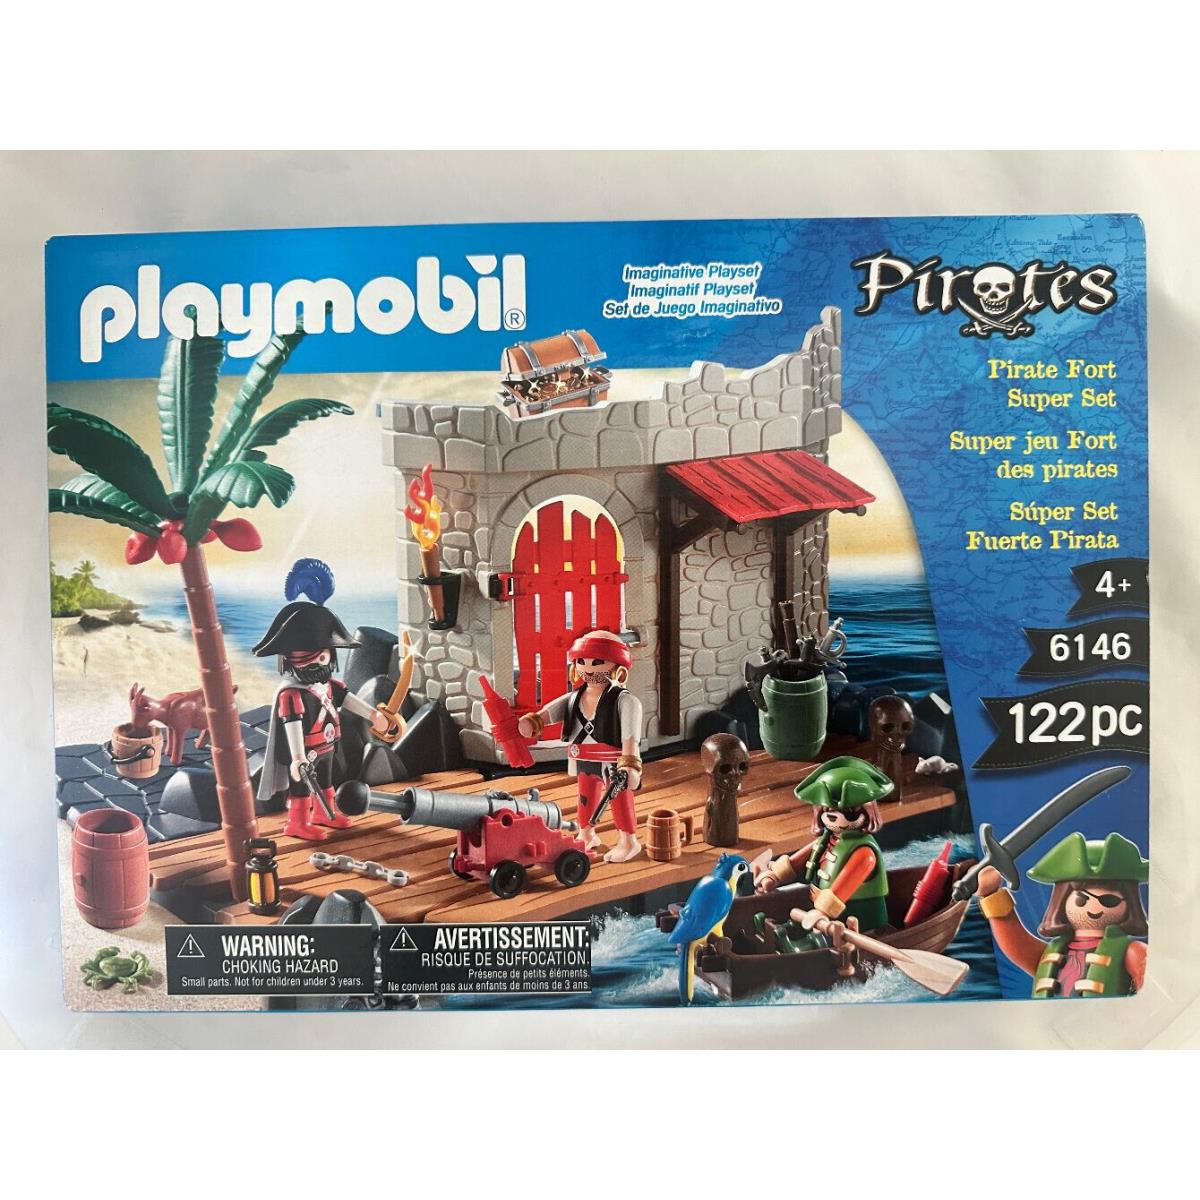 Playmobil 6146 Pirate Fort Super Set with Floating Rowboat 122 Piece